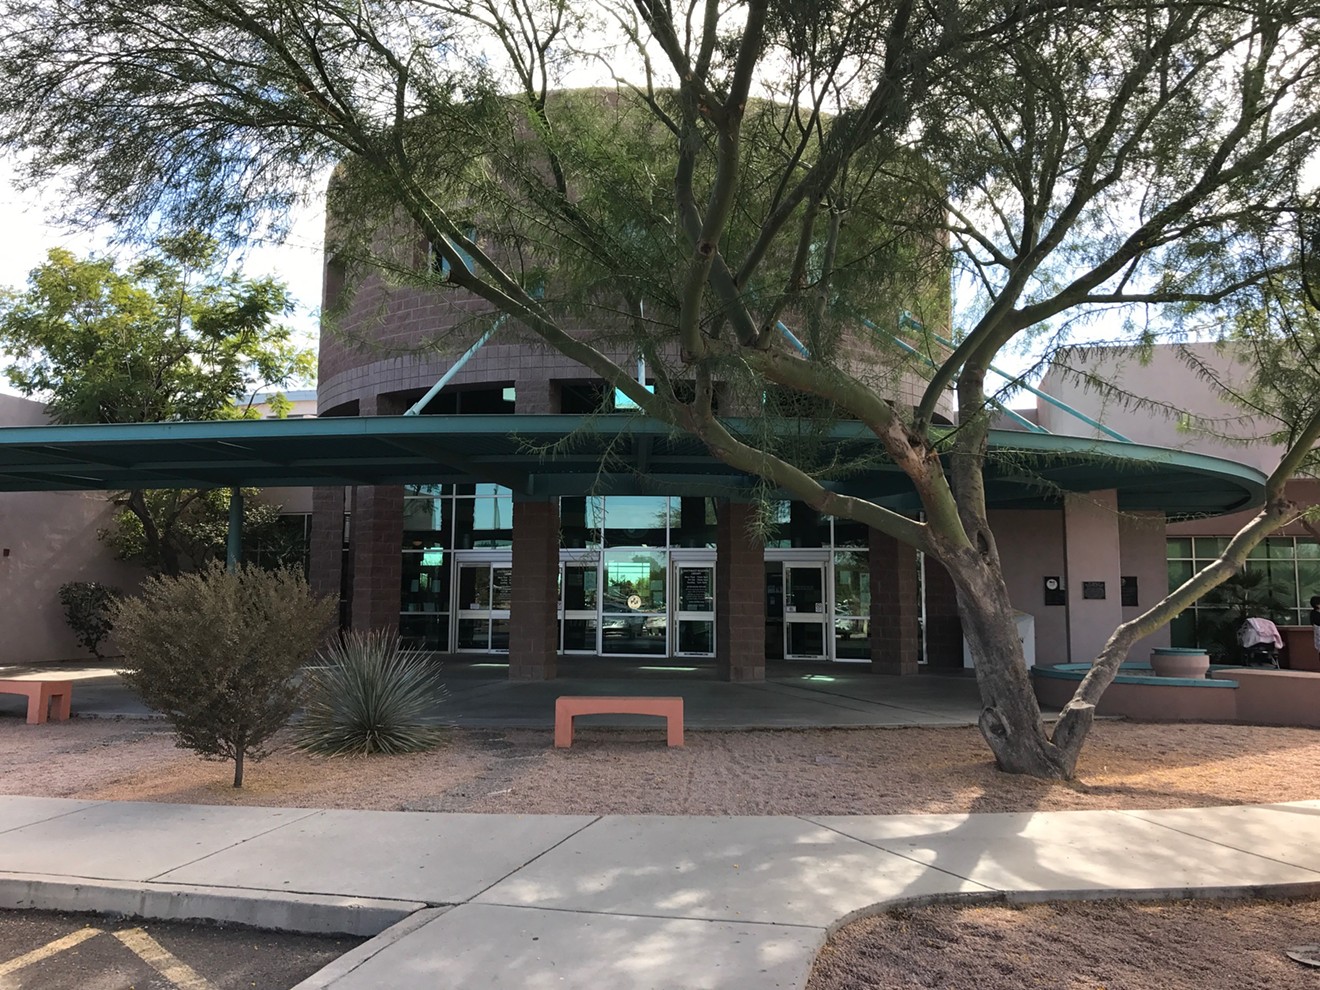 Entrance to Southeast Regional Library in Gilbert.